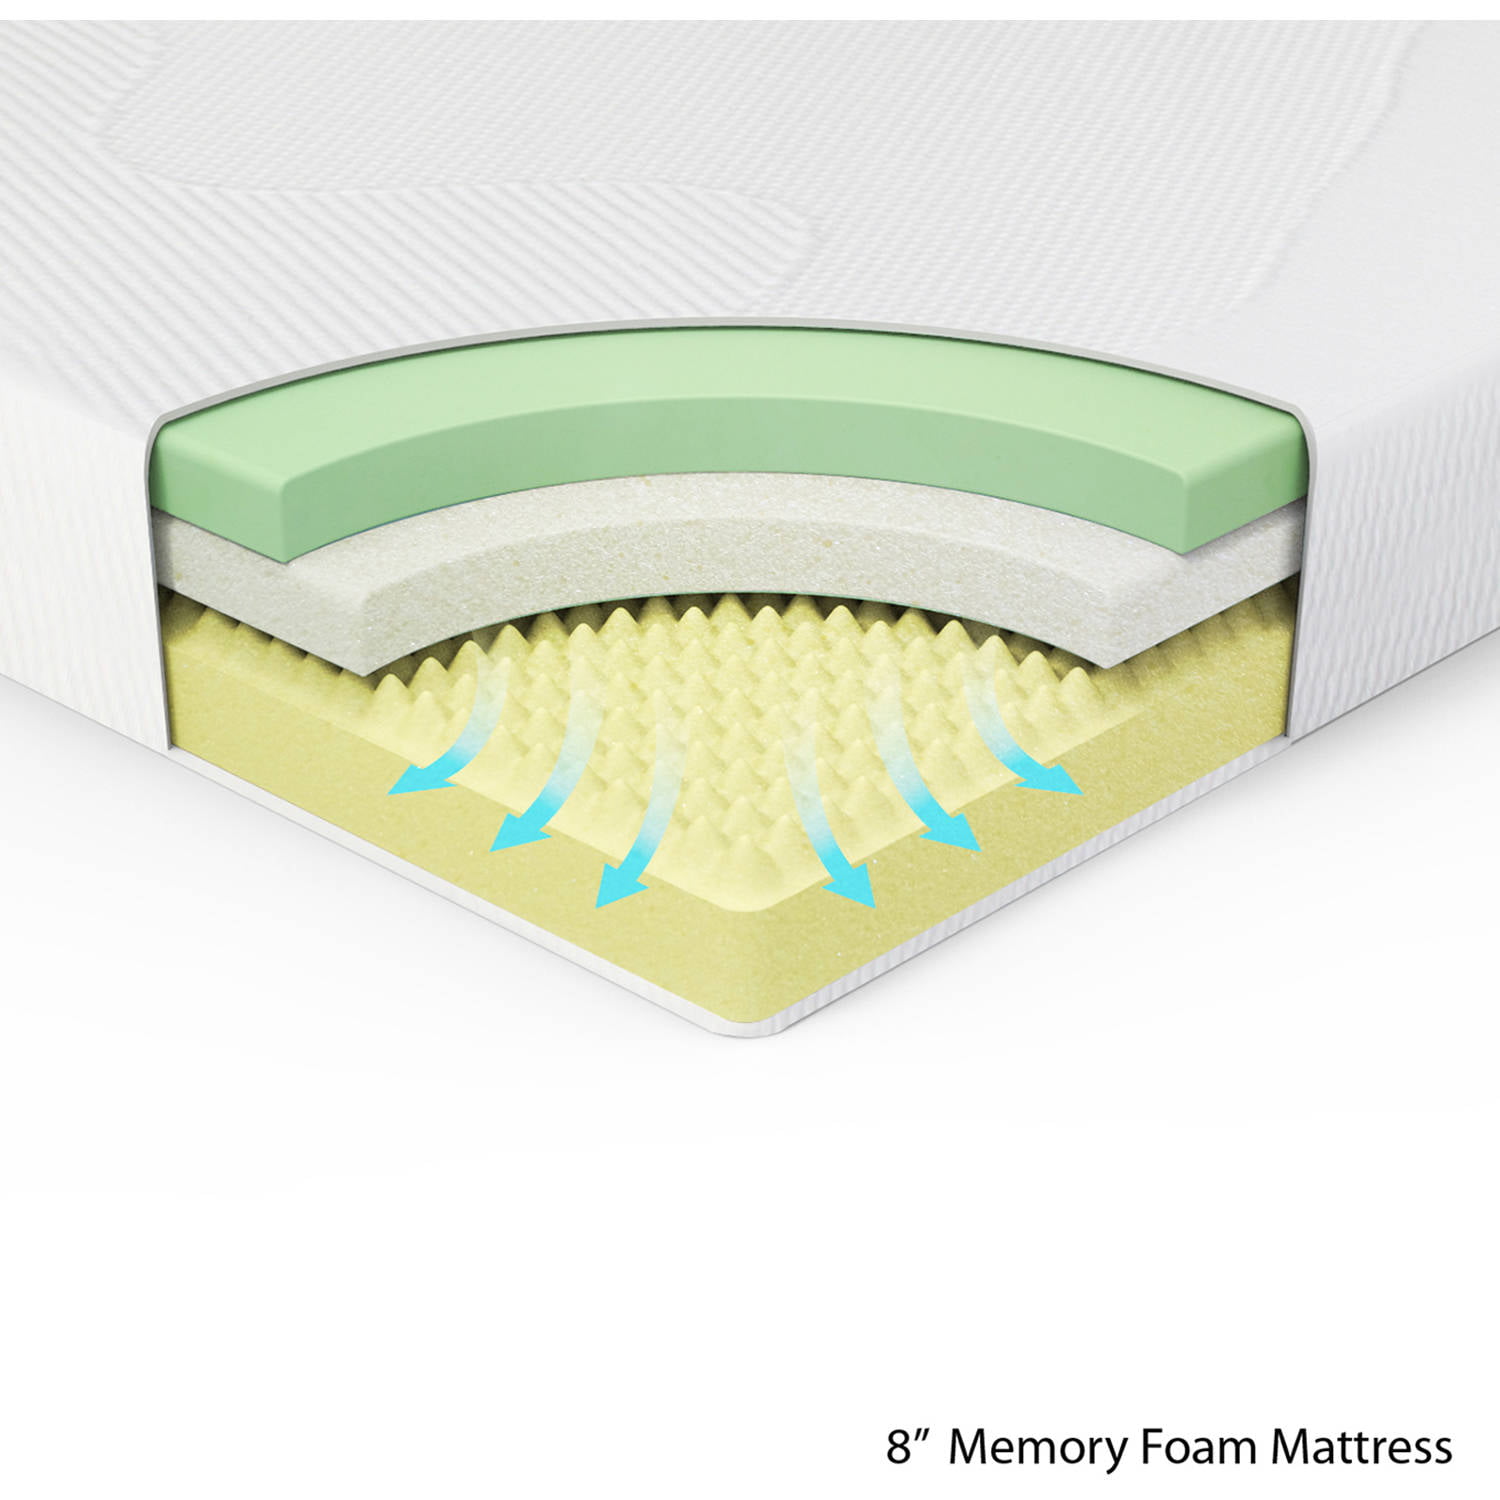 Best Mattresses of 2020 | Updated 2020 Reviews‎: How To Cut A Memory ...